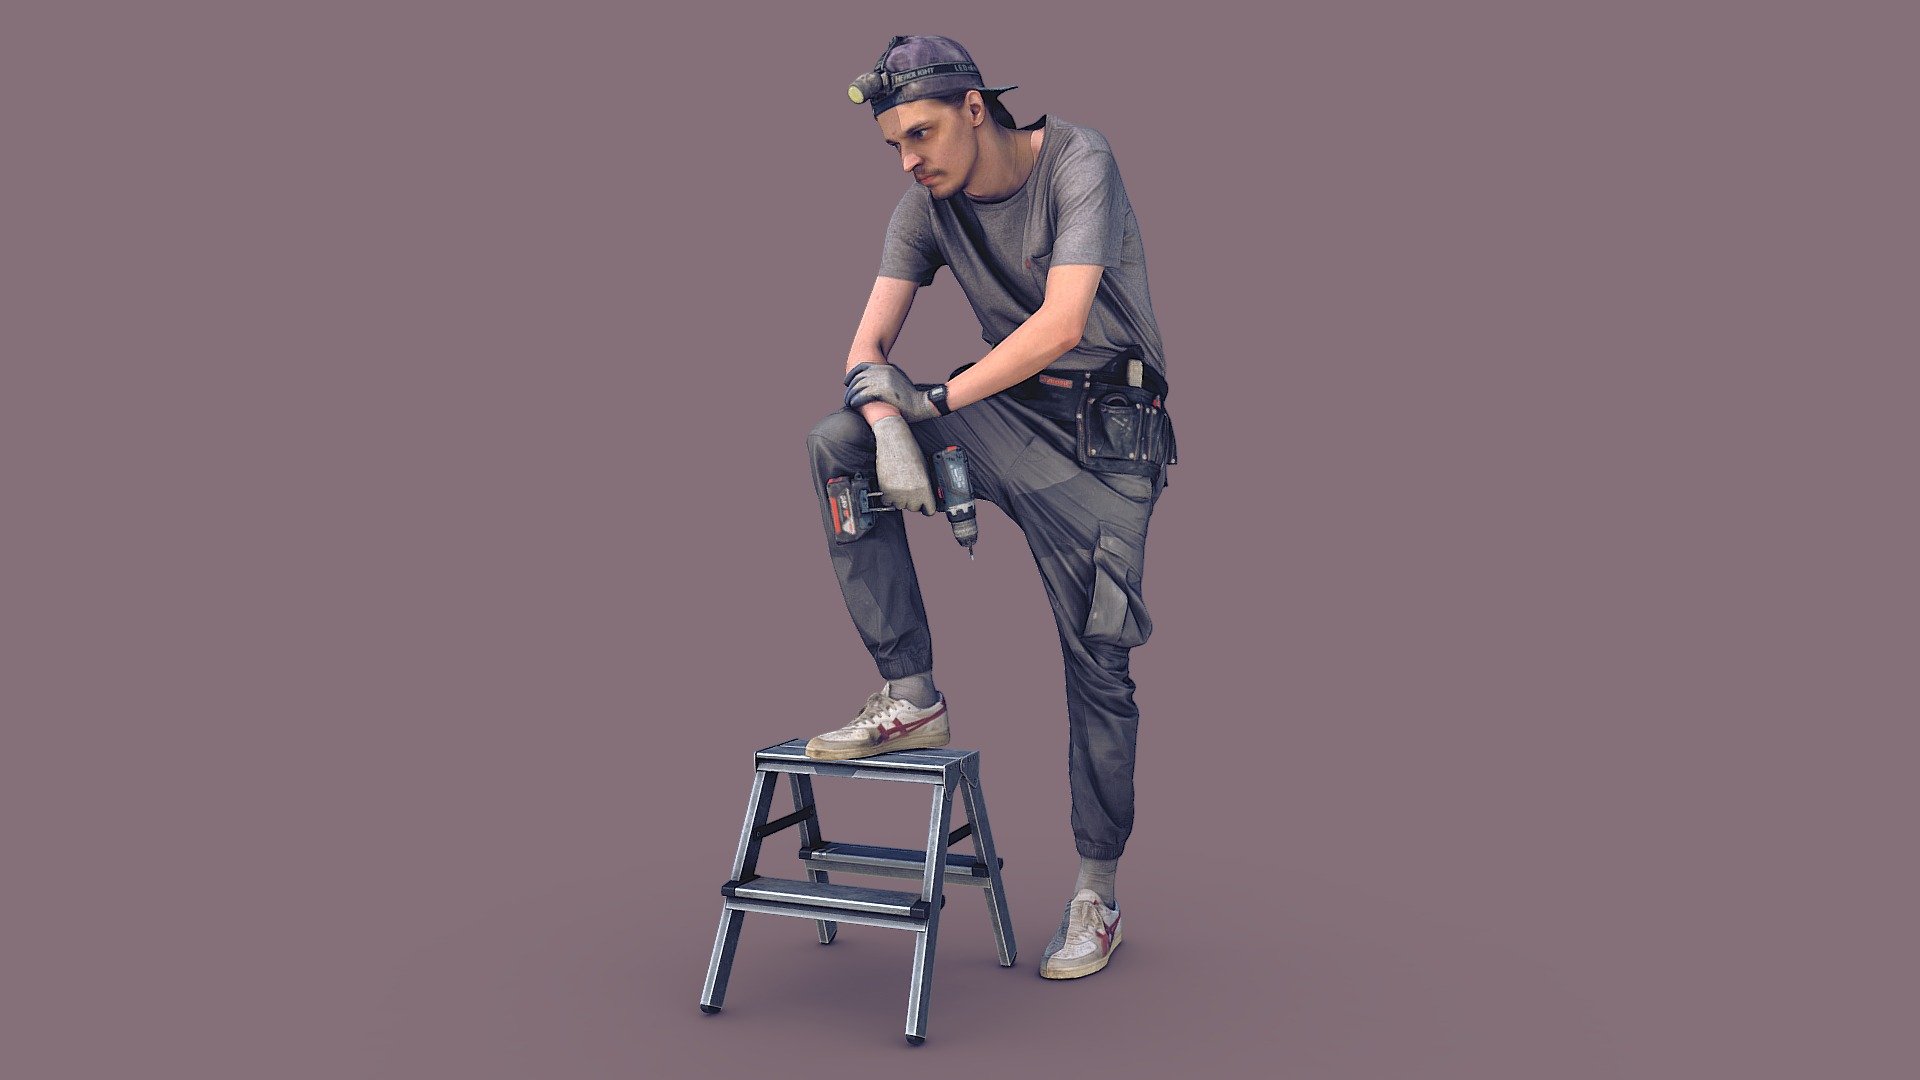 ✉️ A young man, a guy, a builder, a worker, in a construction uniform, in a cap with a head lamp, with tool belt bag, stands on a step, holds a construction tool in his hands, resting, thinking.

🦾 This model will be an excellent mid-range participant. It does not need to be very close and try to see the details, it reveals and demonstrates its texture as much as possible in case of a certain distance from the foreground.

⚙️ Photorealistic Construction Worker Character 3d model ready for Virtual Reality (VR), Augmented Reality (AR), games and other real-time apps. 
Suitable for the architectural visualization and another graphical projects. 
50 000 polygons per model 3d model